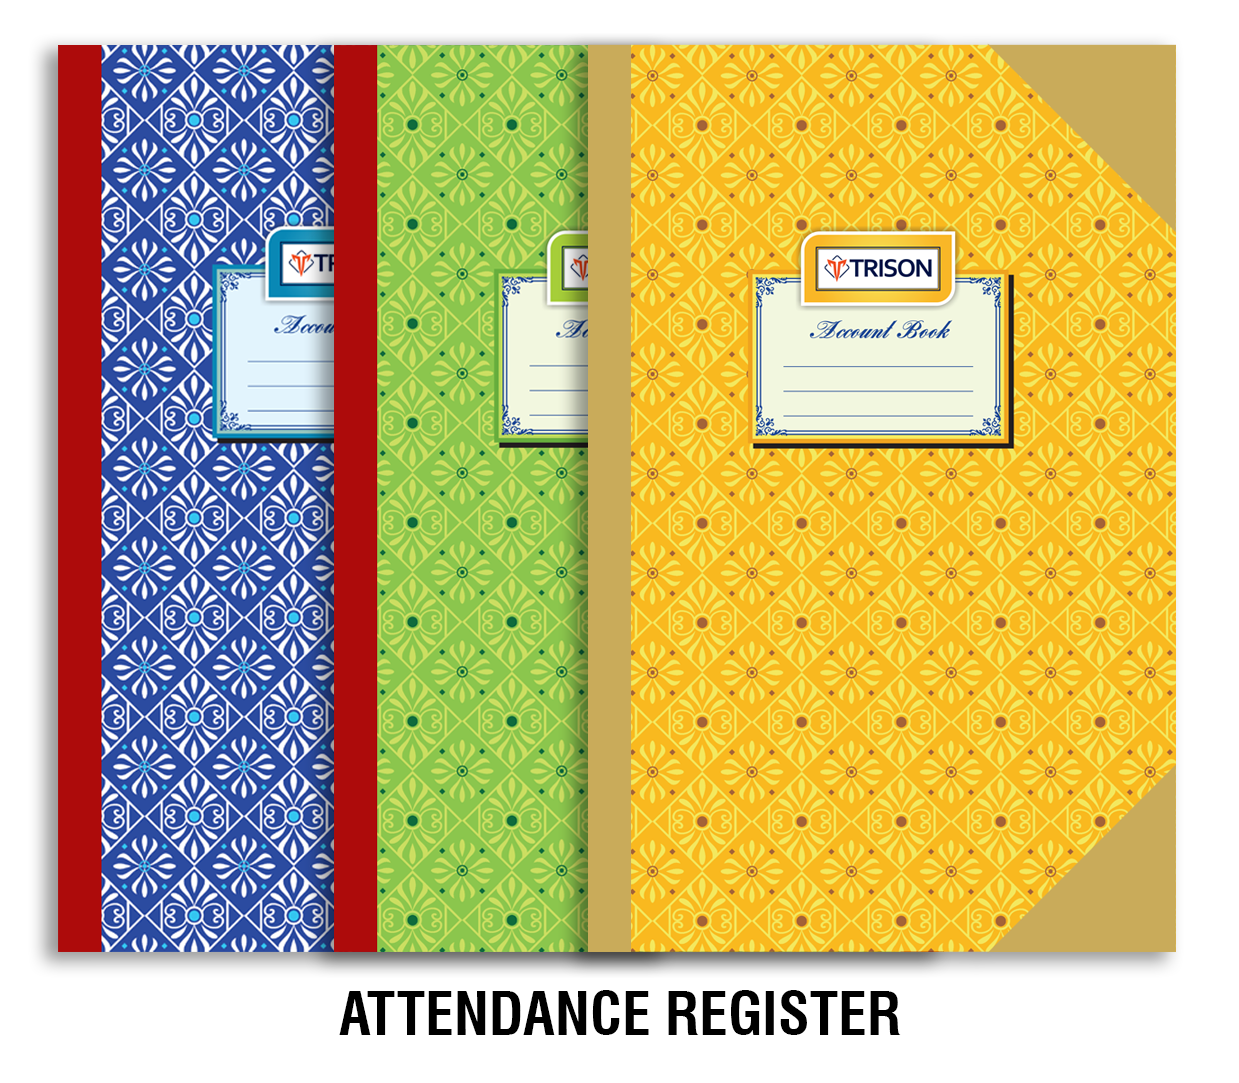 Trison Attendance Register (premium quality) | Available in White (L/B) & Ordinary Binding (O/B) | 65 GSM | Green ledger paper | Size: 19.5 x 32.5 cm | Superior cloth hardbound | Gloss laminated printed cover | Available in No./Pages: 1/56, 2/112, 3/168, 4/224, 6/384, & 8/512 | Comes with Index page | Also known as Kona pusta binding | staff attendance | school attendance | haajri | employee attendance | attendance register | attendance book